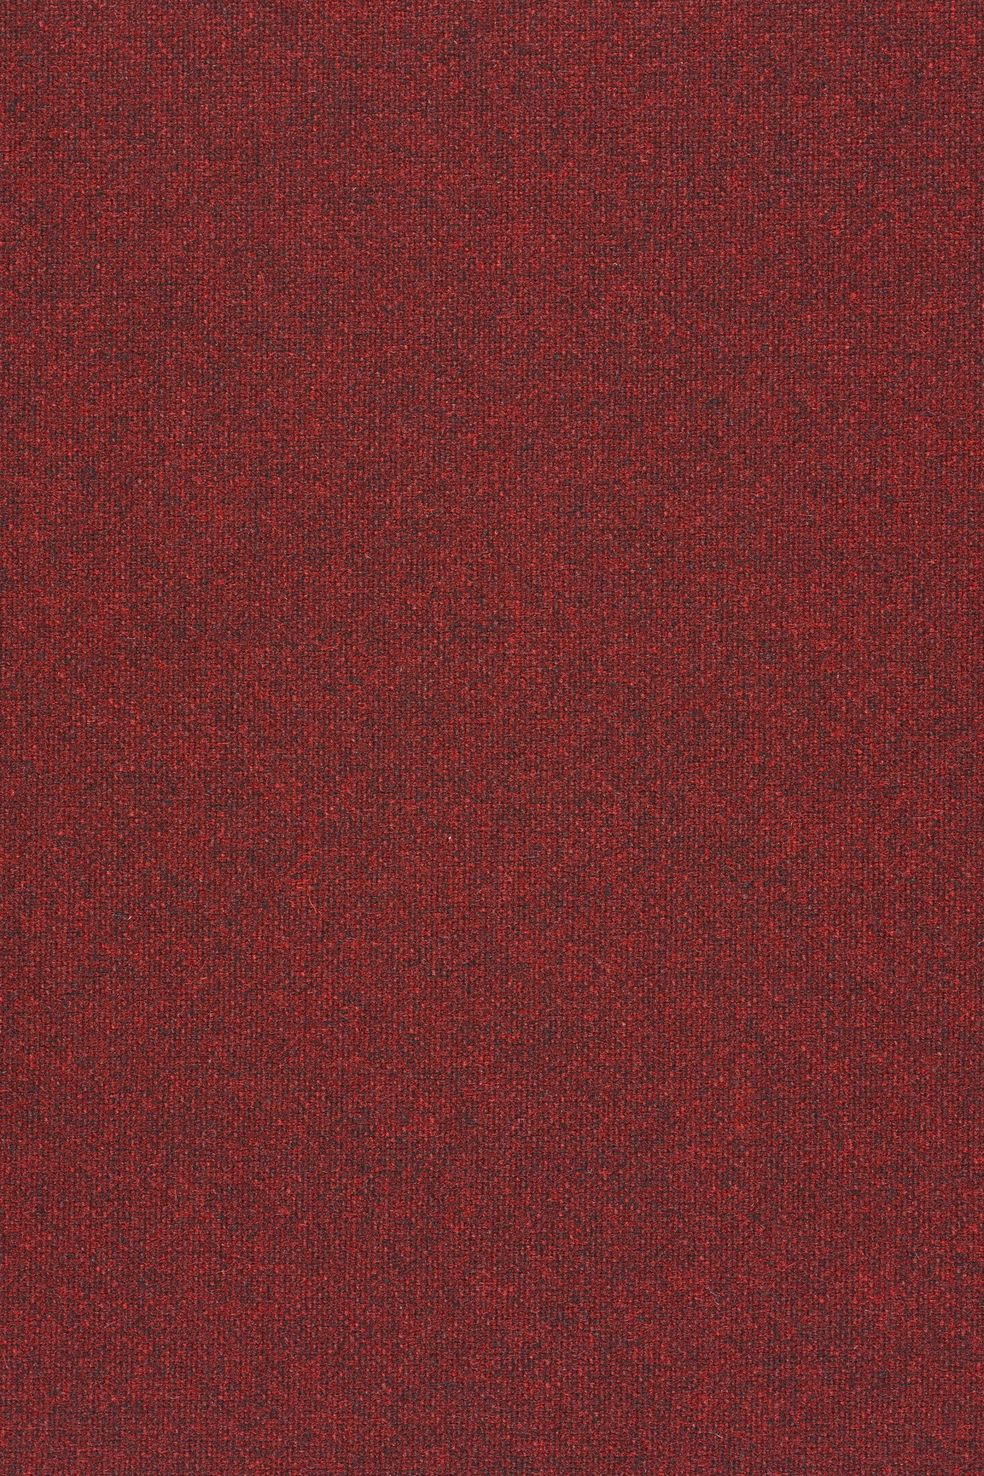 Fabric sample Tonica 2 612 red